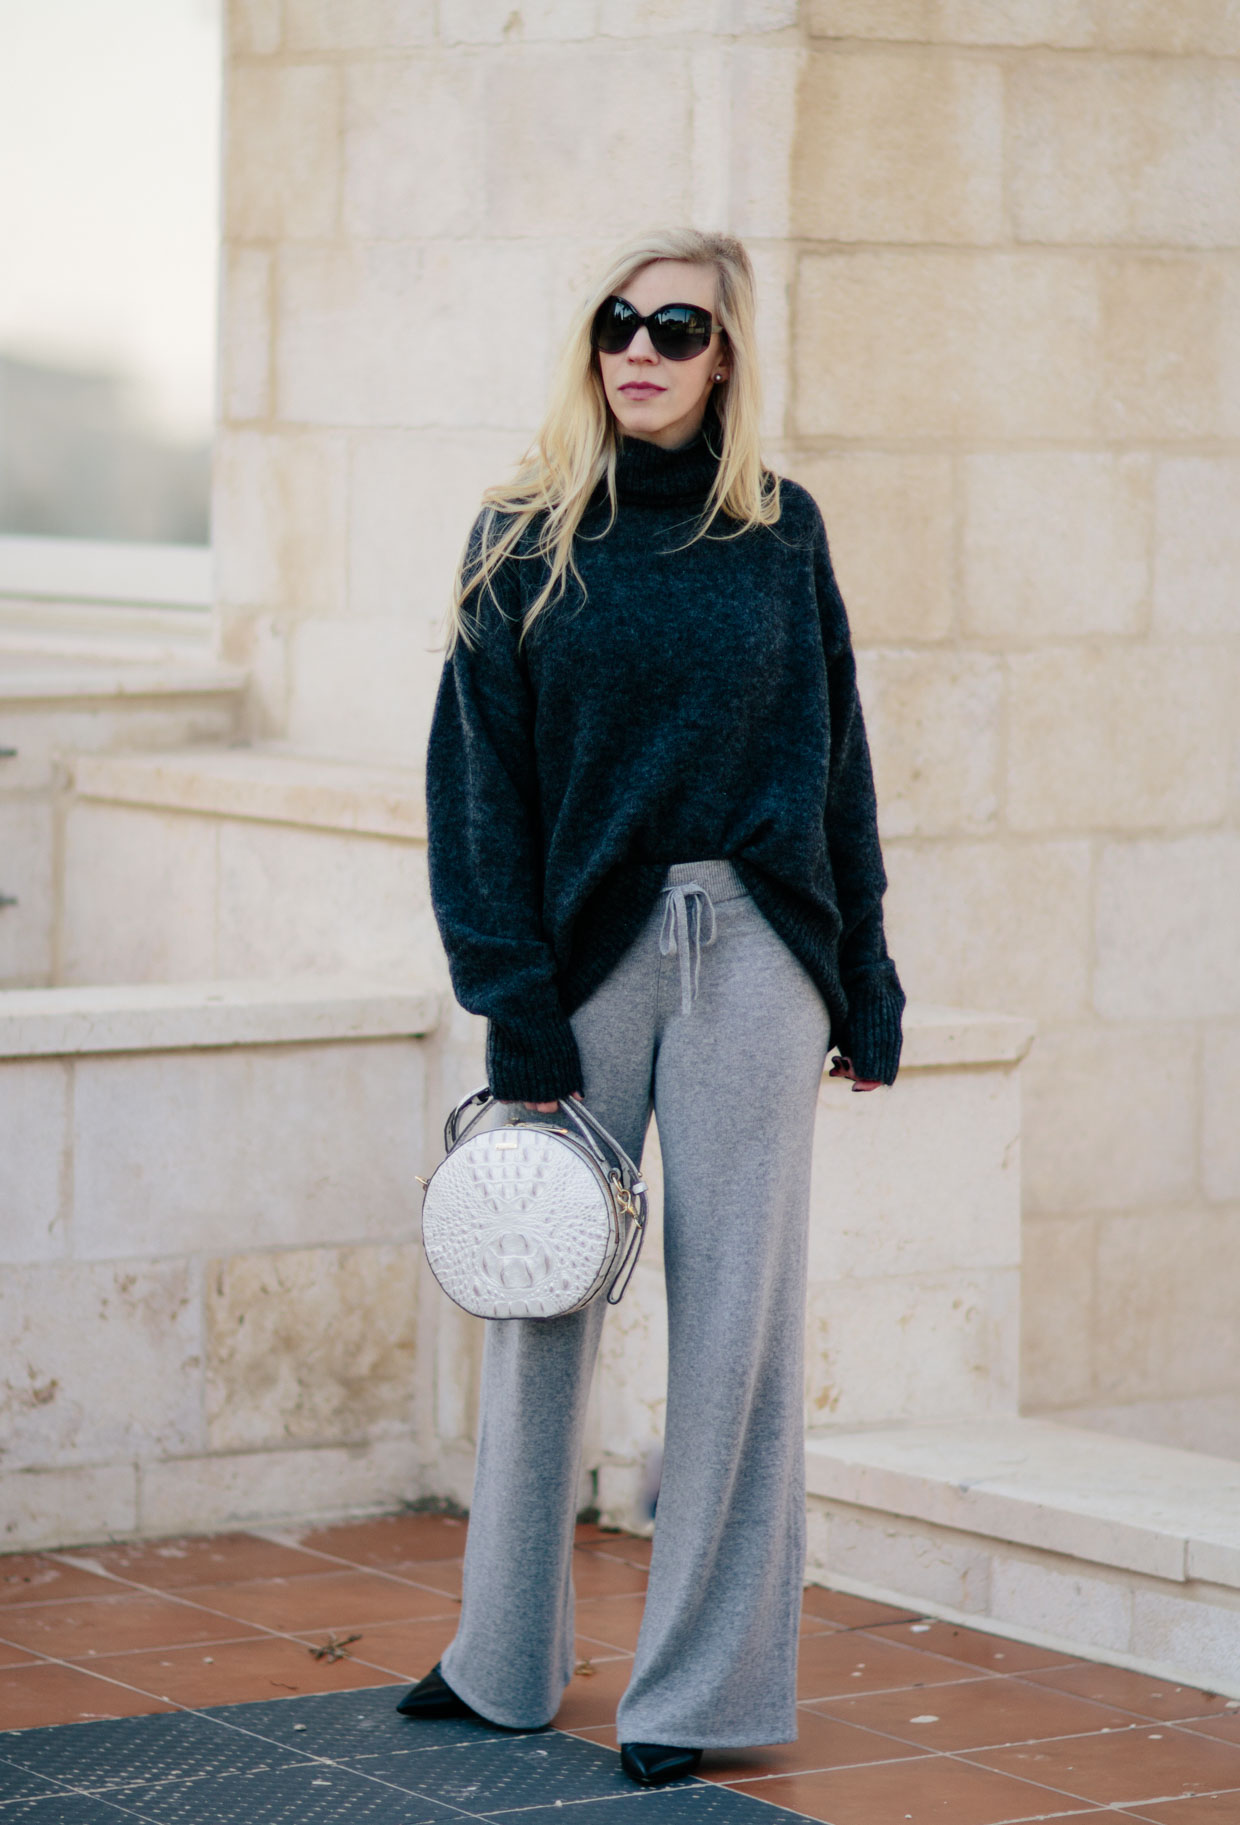 https://meagansmoda.com/wp-content/uploads/2018/01/Meagan-Brandon-fashion-blogger-of-Meagans-Moda-styles-oversized-turtleneck-with-wide-leg-gray-cashmere-pants-how-to-wear-dressy-cashmere-pants.jpg